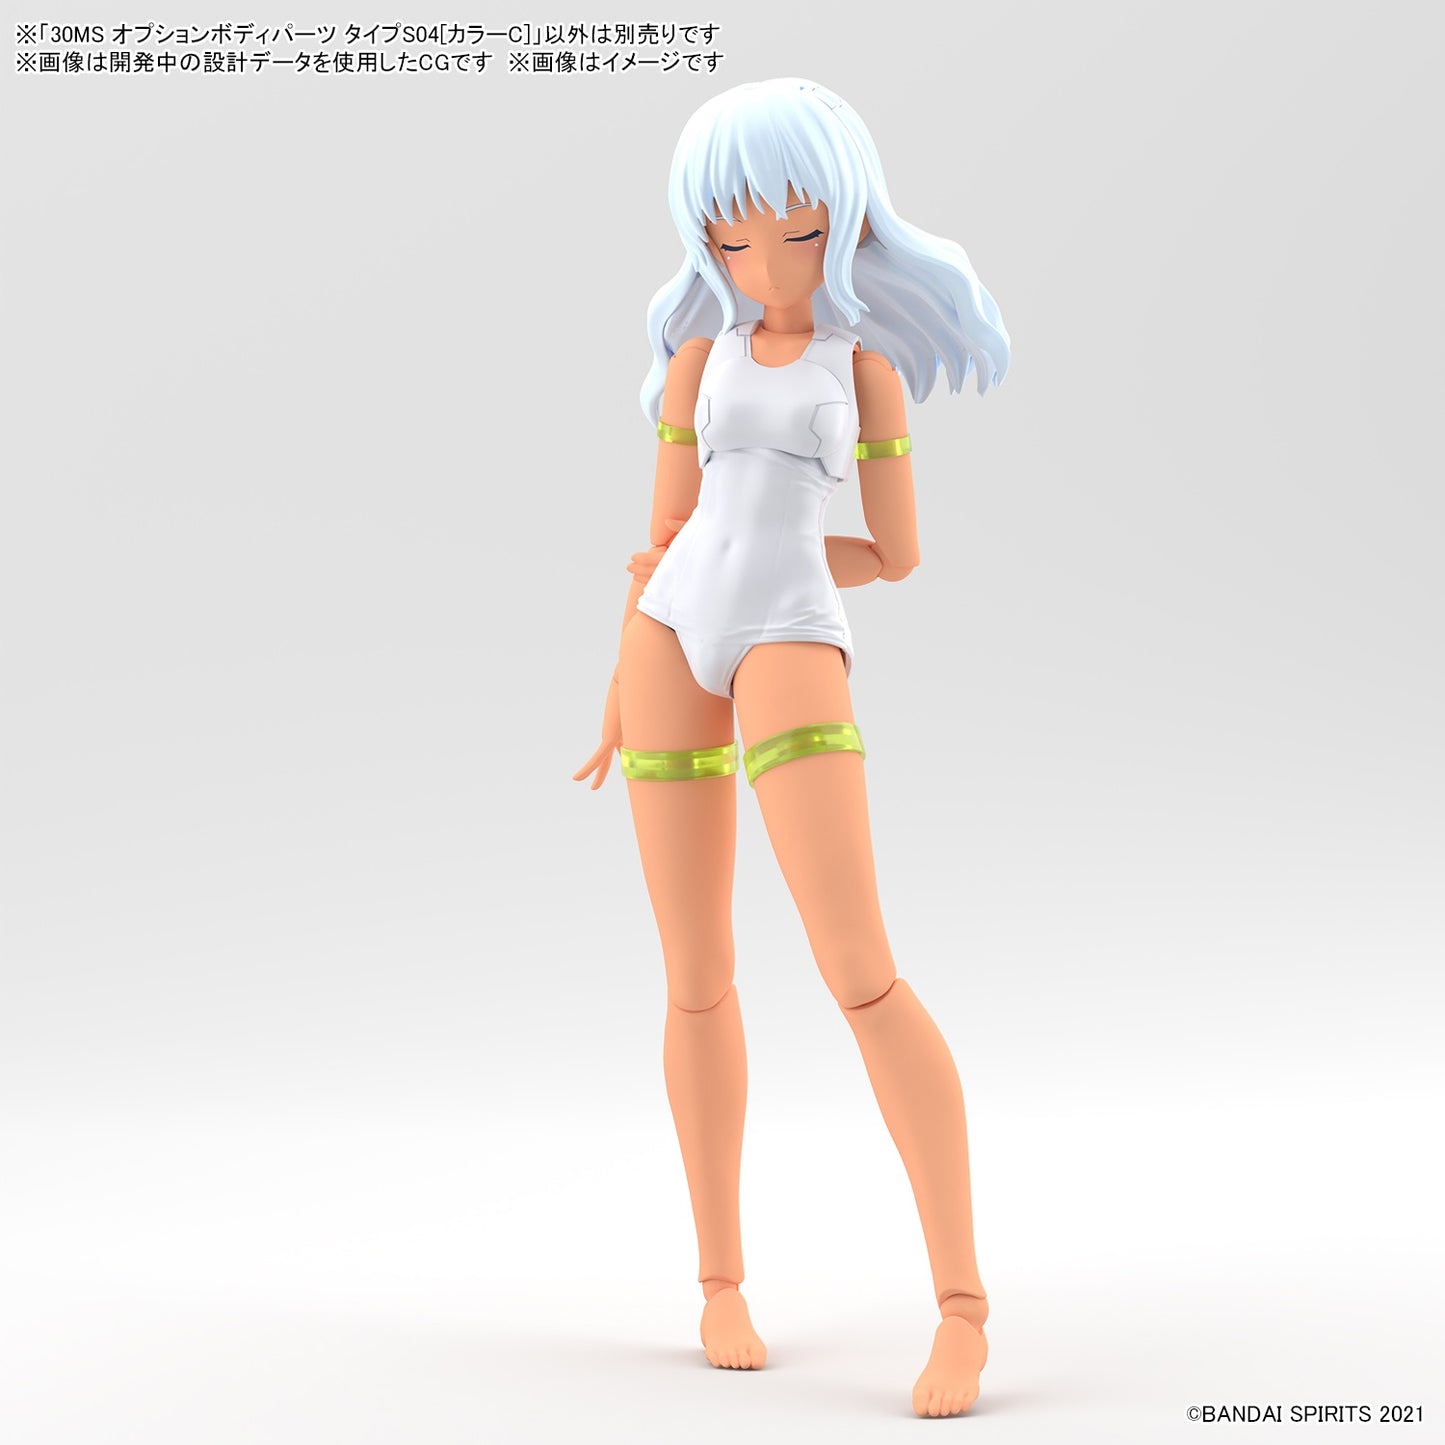 [PREORDER] 30MS OPTION BODY PARTS TYPE S04 [COLOR C]